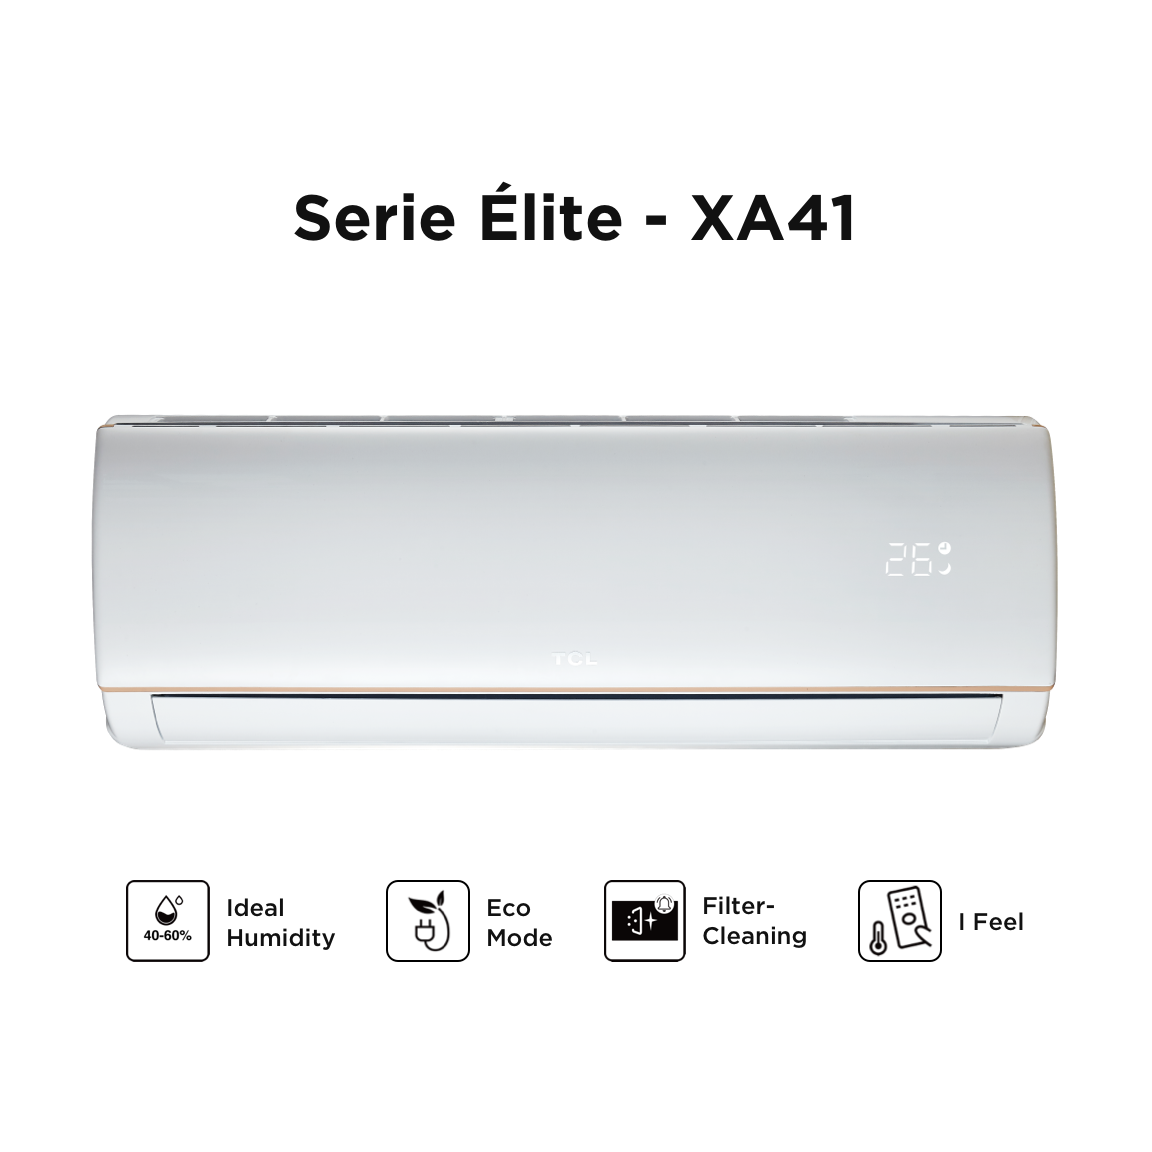 TCL air conditioner XA41